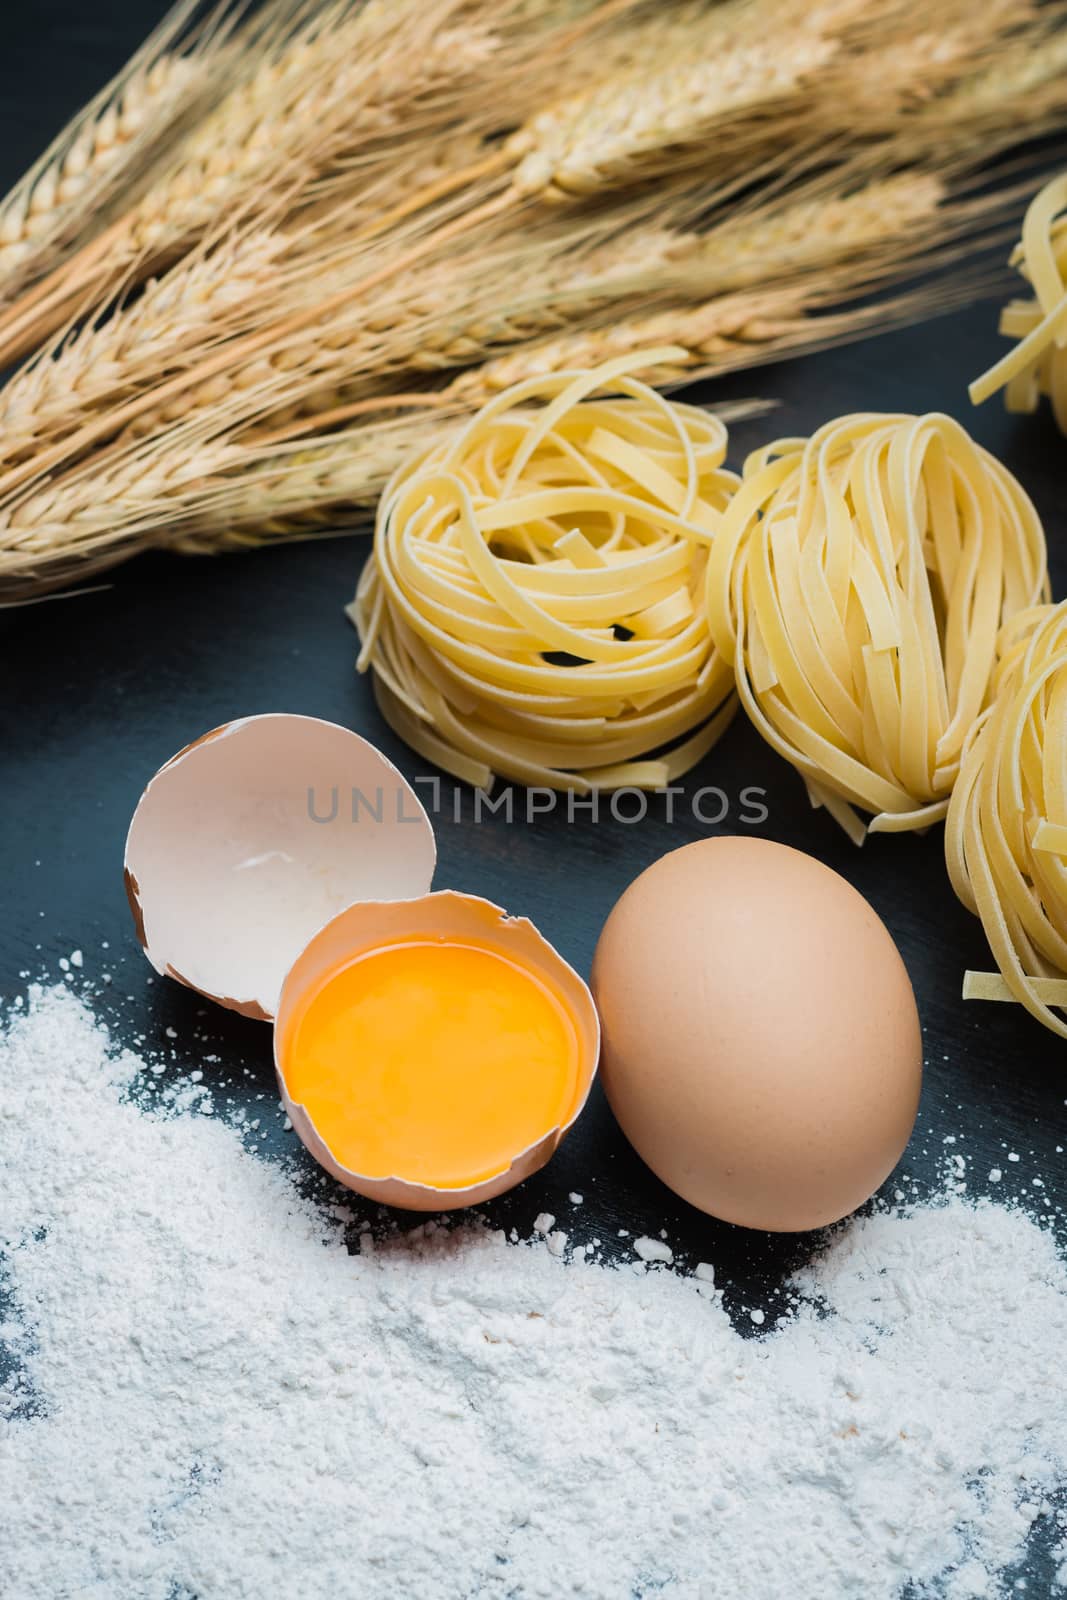 clean Food eggs, wheat flour, Pasta and barley on black wood background